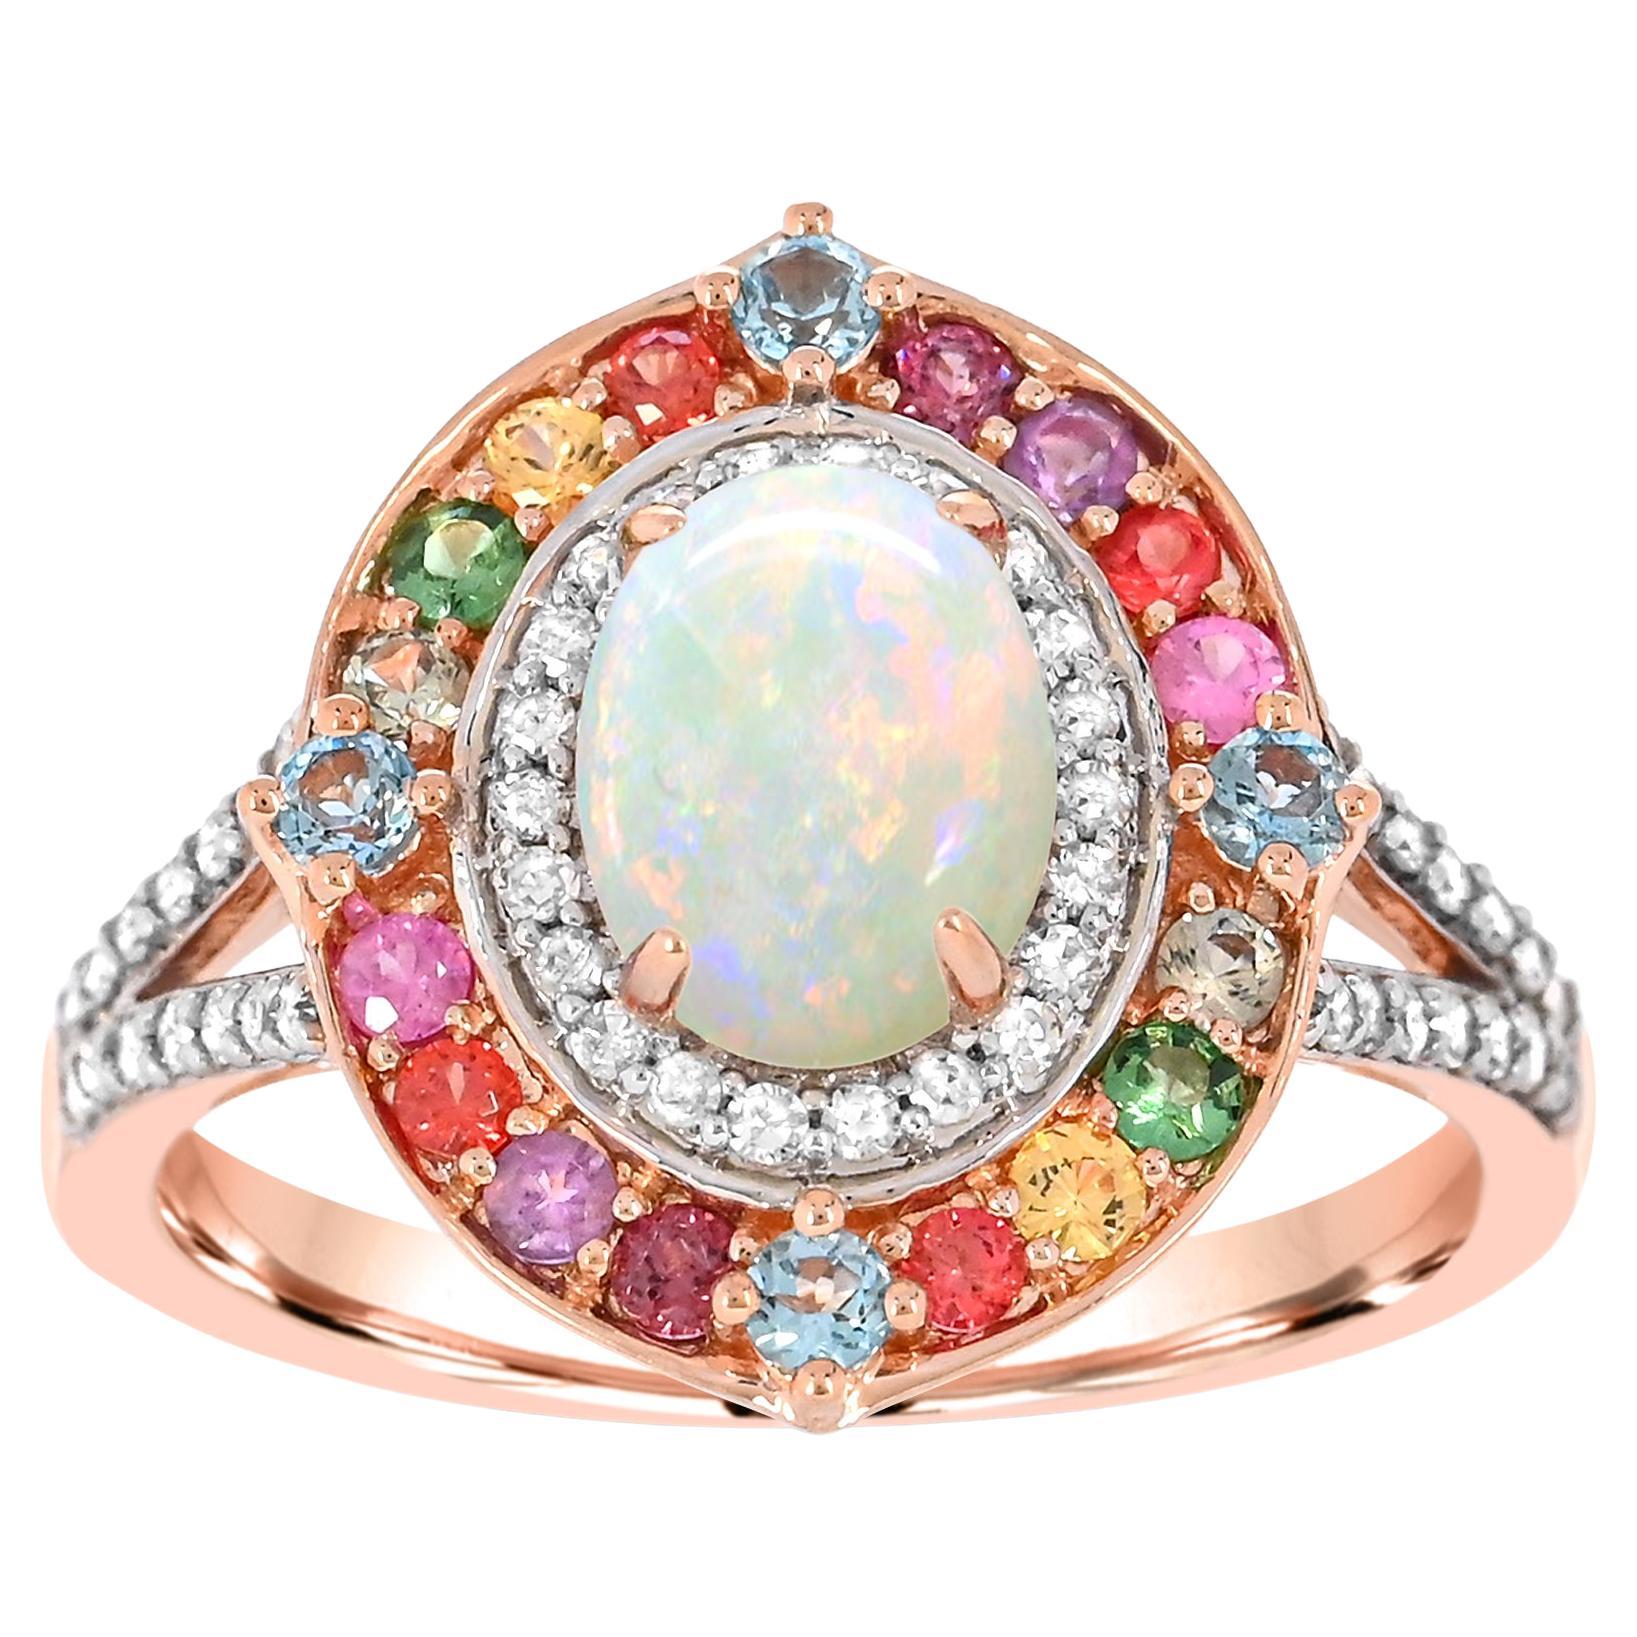 1-3/4 ct. Oval Opal and Multi Gemstone Ethiopian Ring in 14K Rose Gold